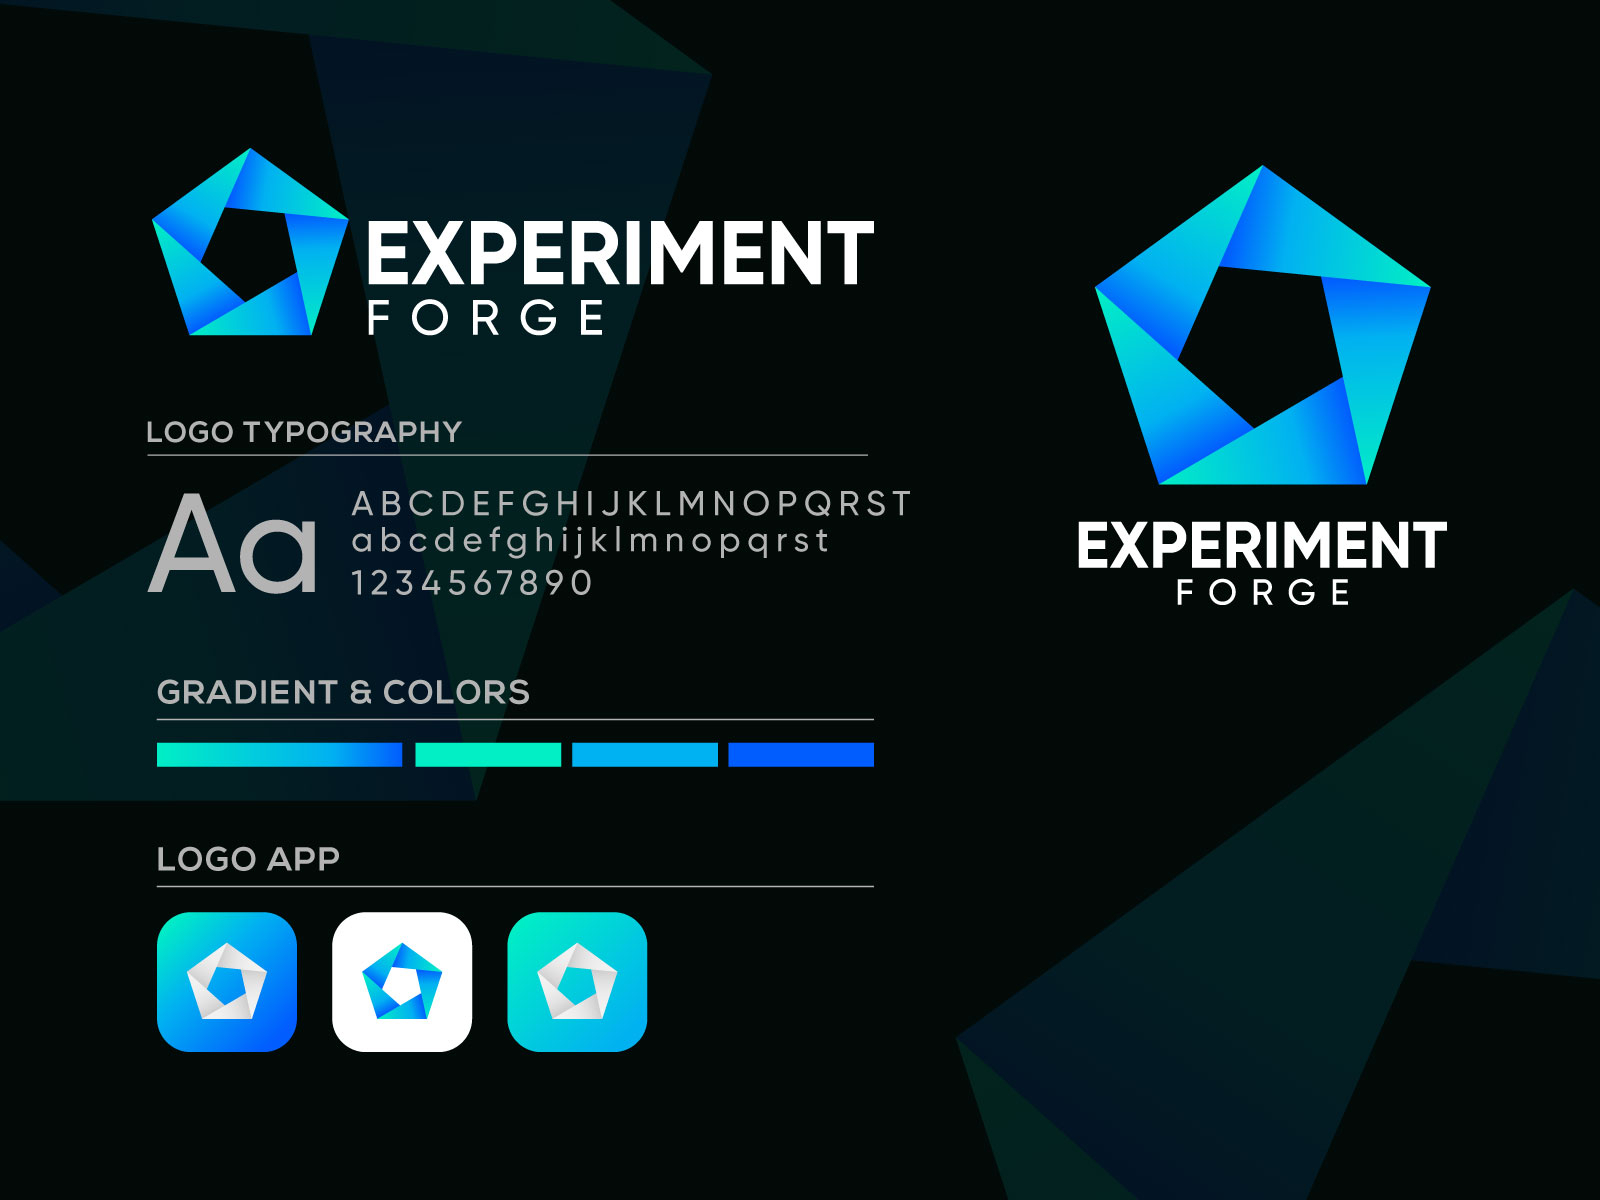 thought experiment logo by M.Nithin Chandar on Dribbble